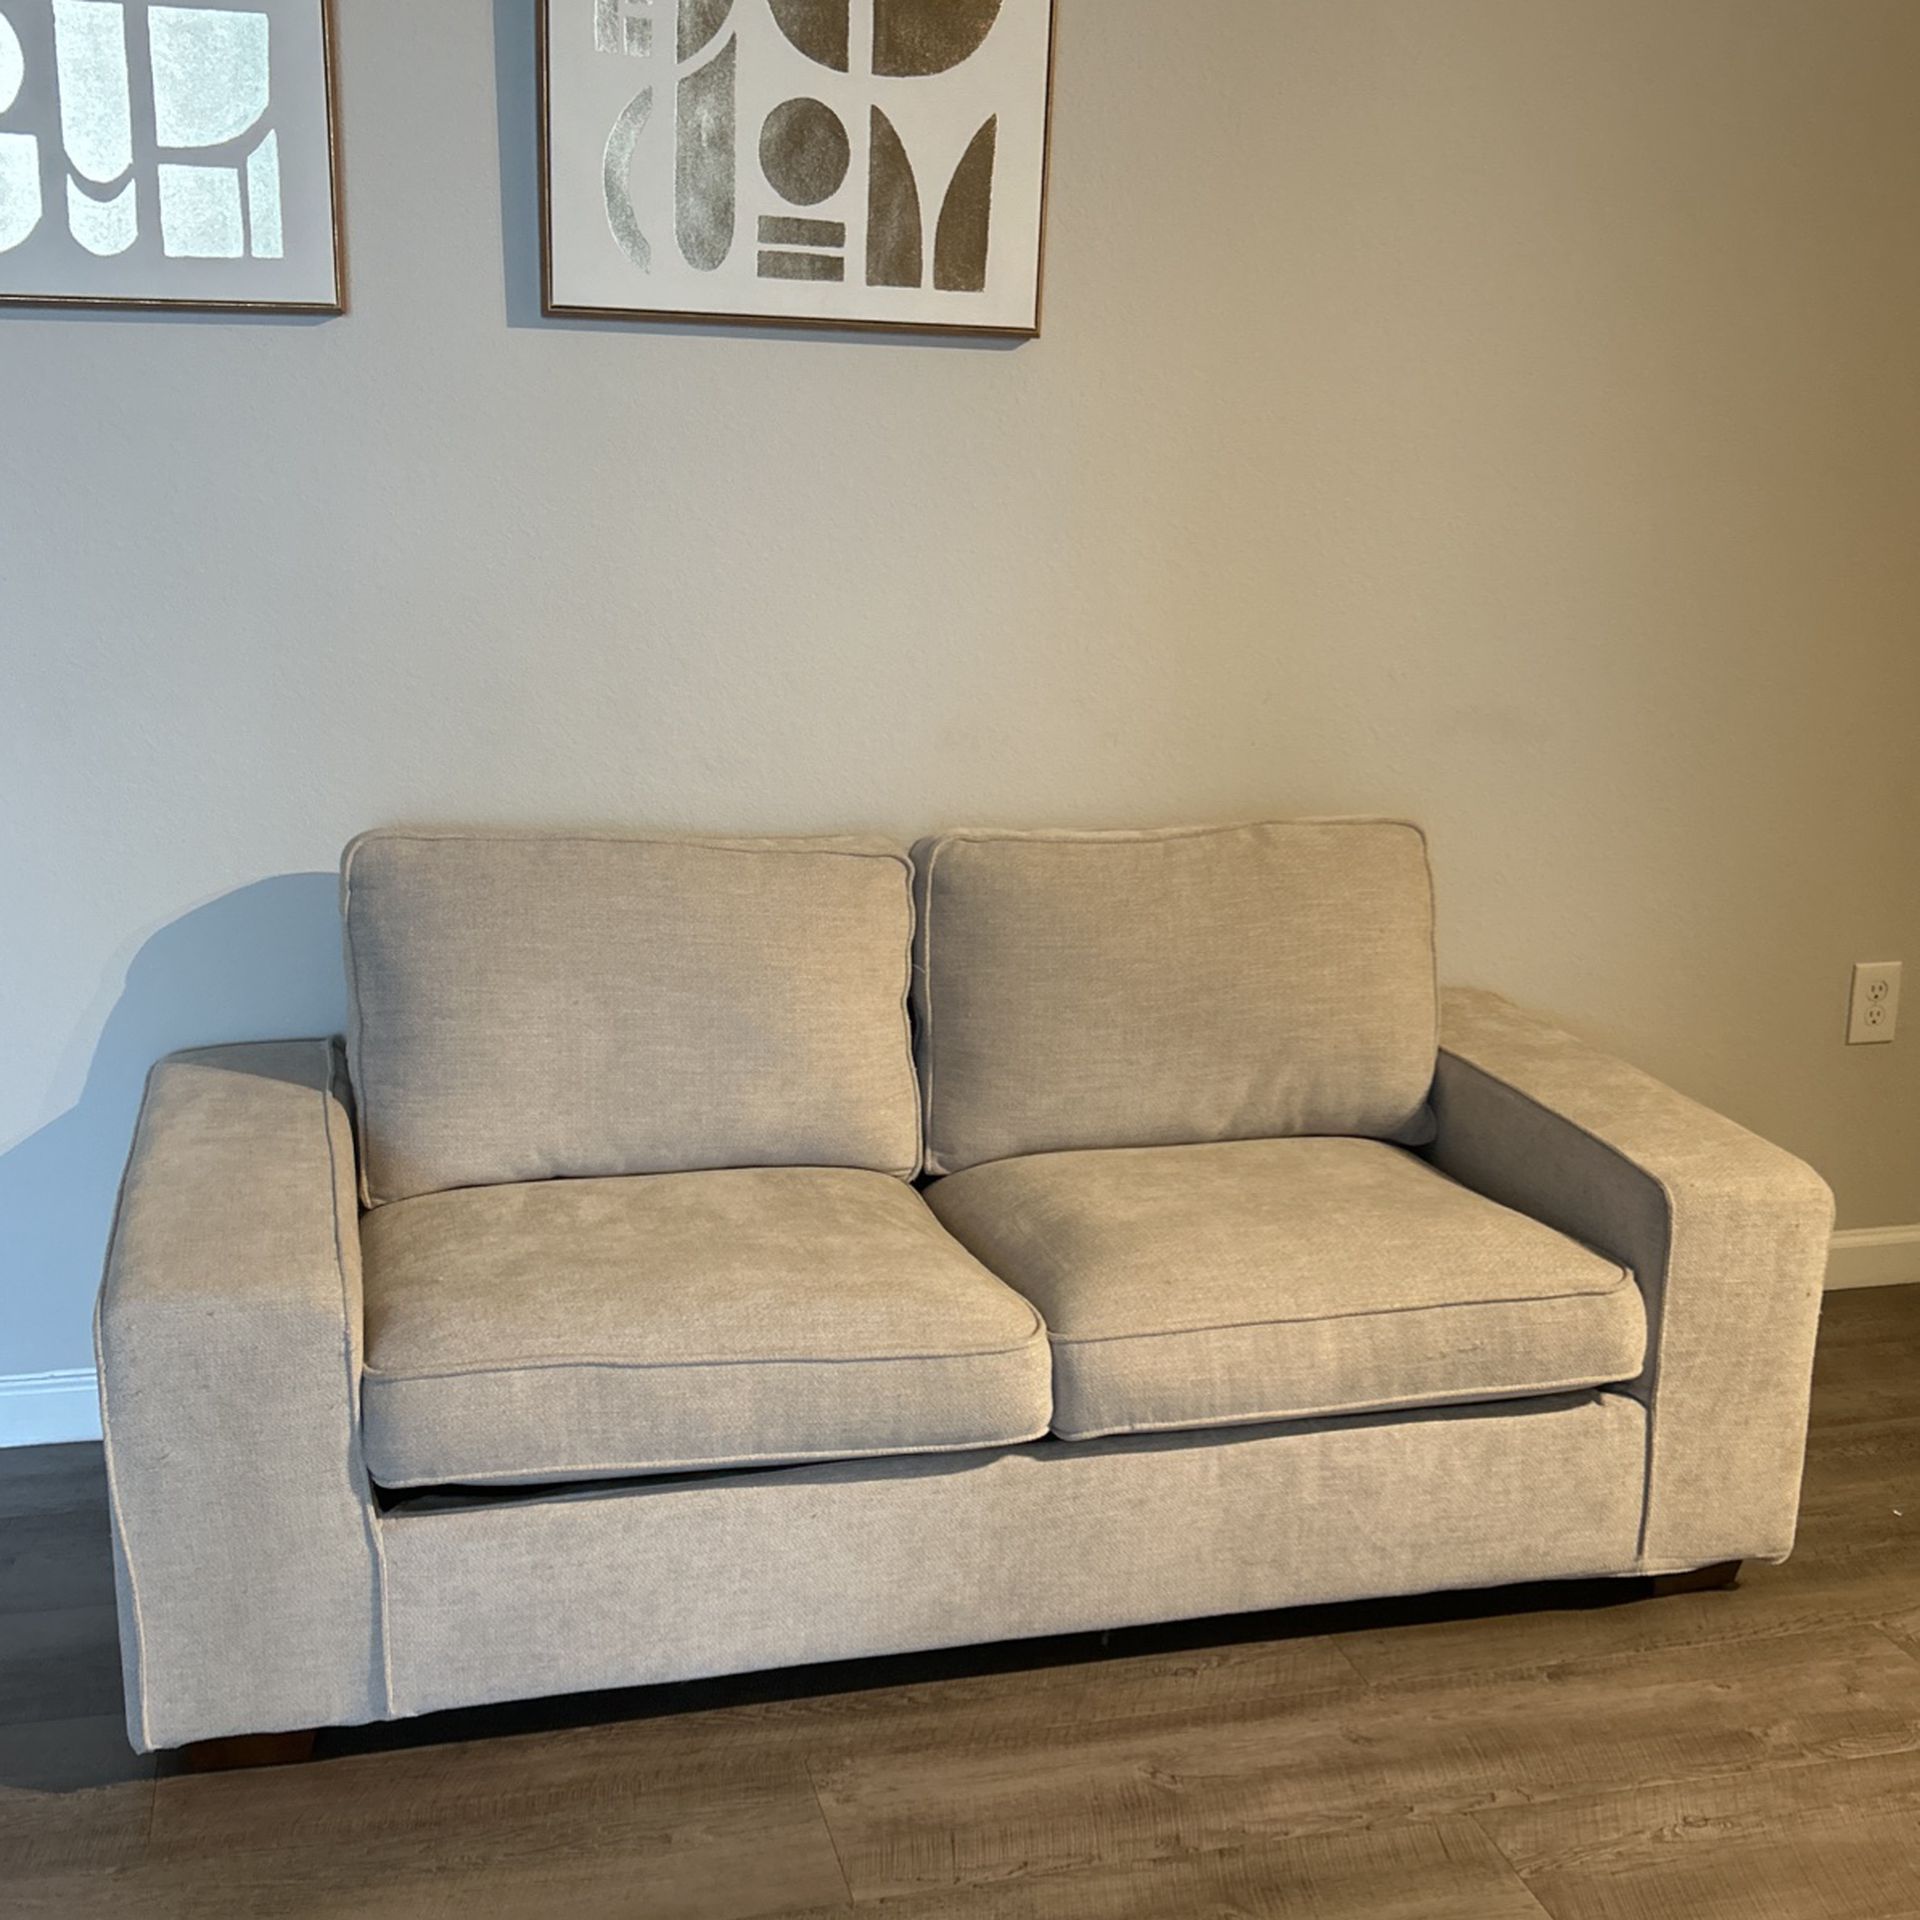 Small Couch Beige Color 